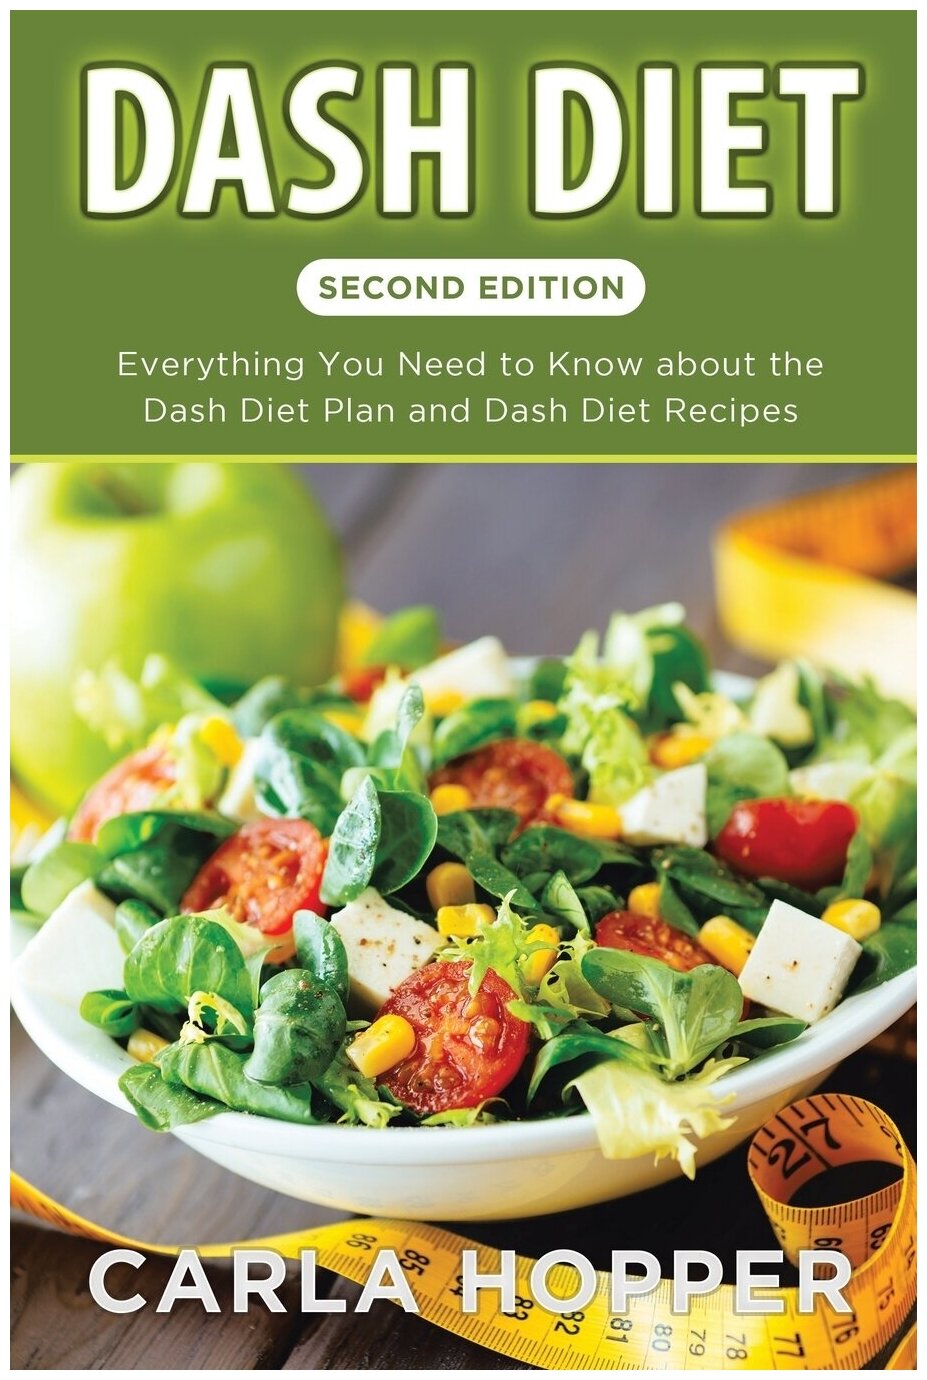 Dash Diet [Second Edition]. Everything You Need to Know about the Dash Diet Plan and Dash Diet Recipes